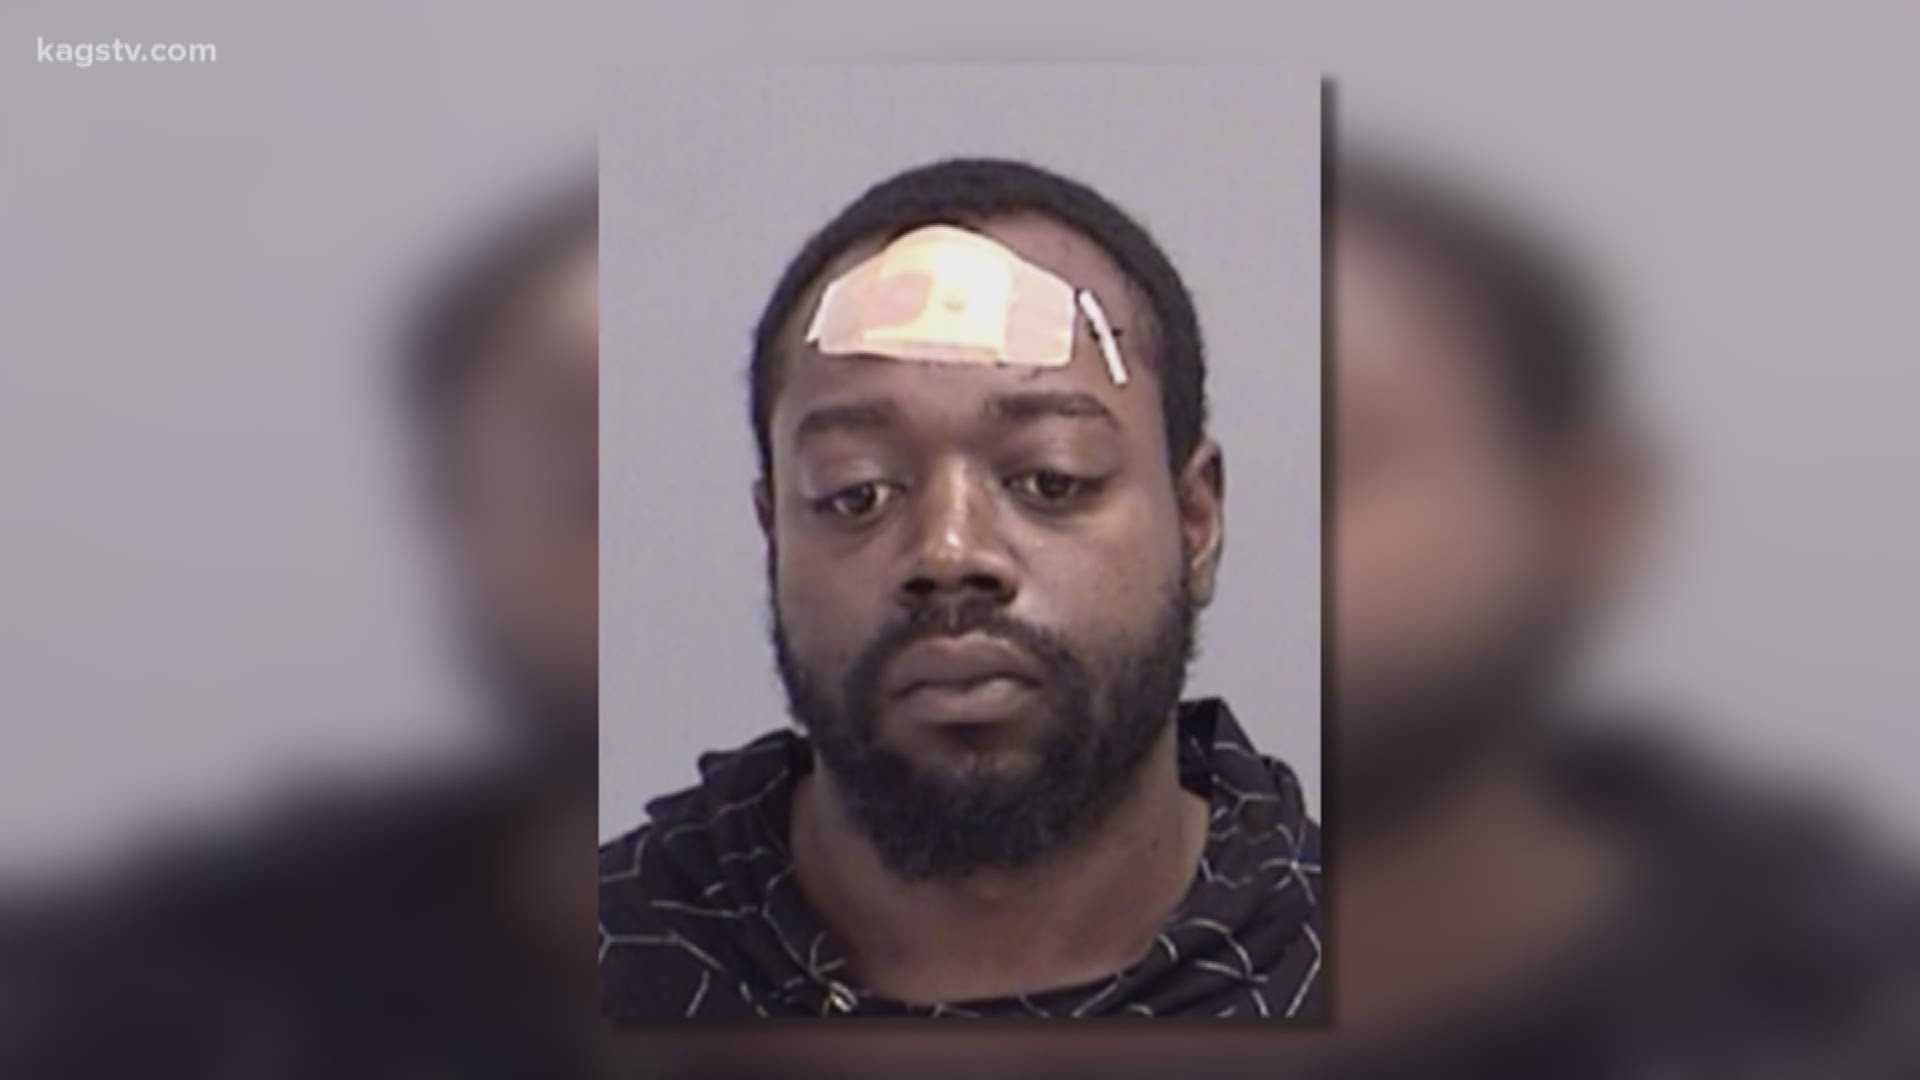 Police said the rear window of the vehicle busted during the struggle to arrest Deviaen Wheeler.